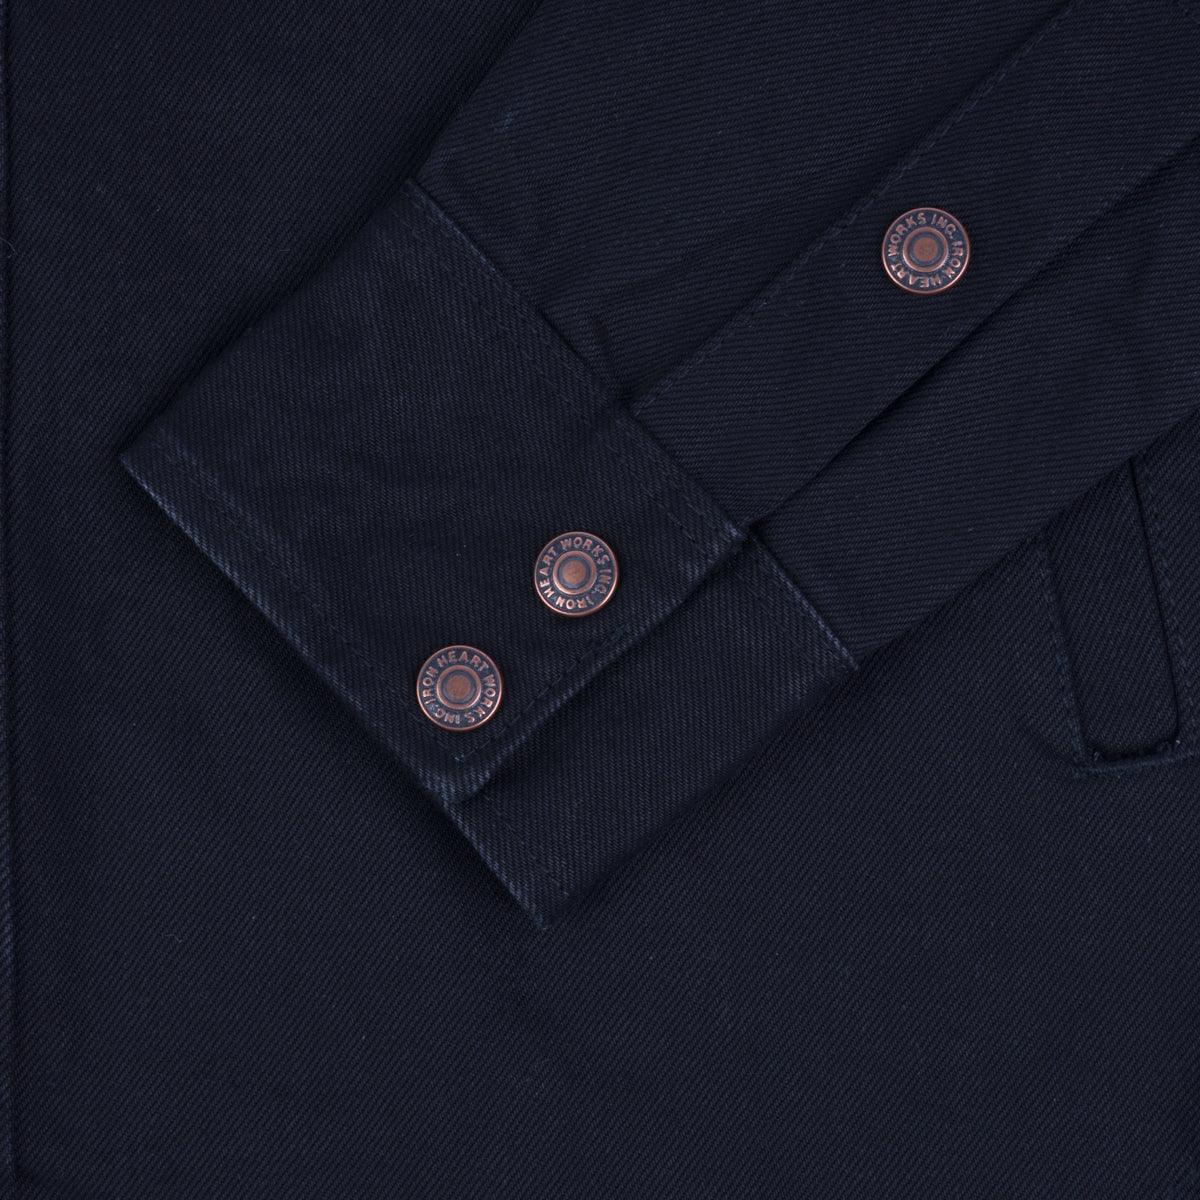 Image showing the IHSH-362-SBG - 16oz Non-Selvedge Denim CPO Shirt - Superblack (Fades to Grey) which is a Shirts described by the following info Iron Heart, Released, Shirts, Tops and sold on the IRON HEART GERMANY online store